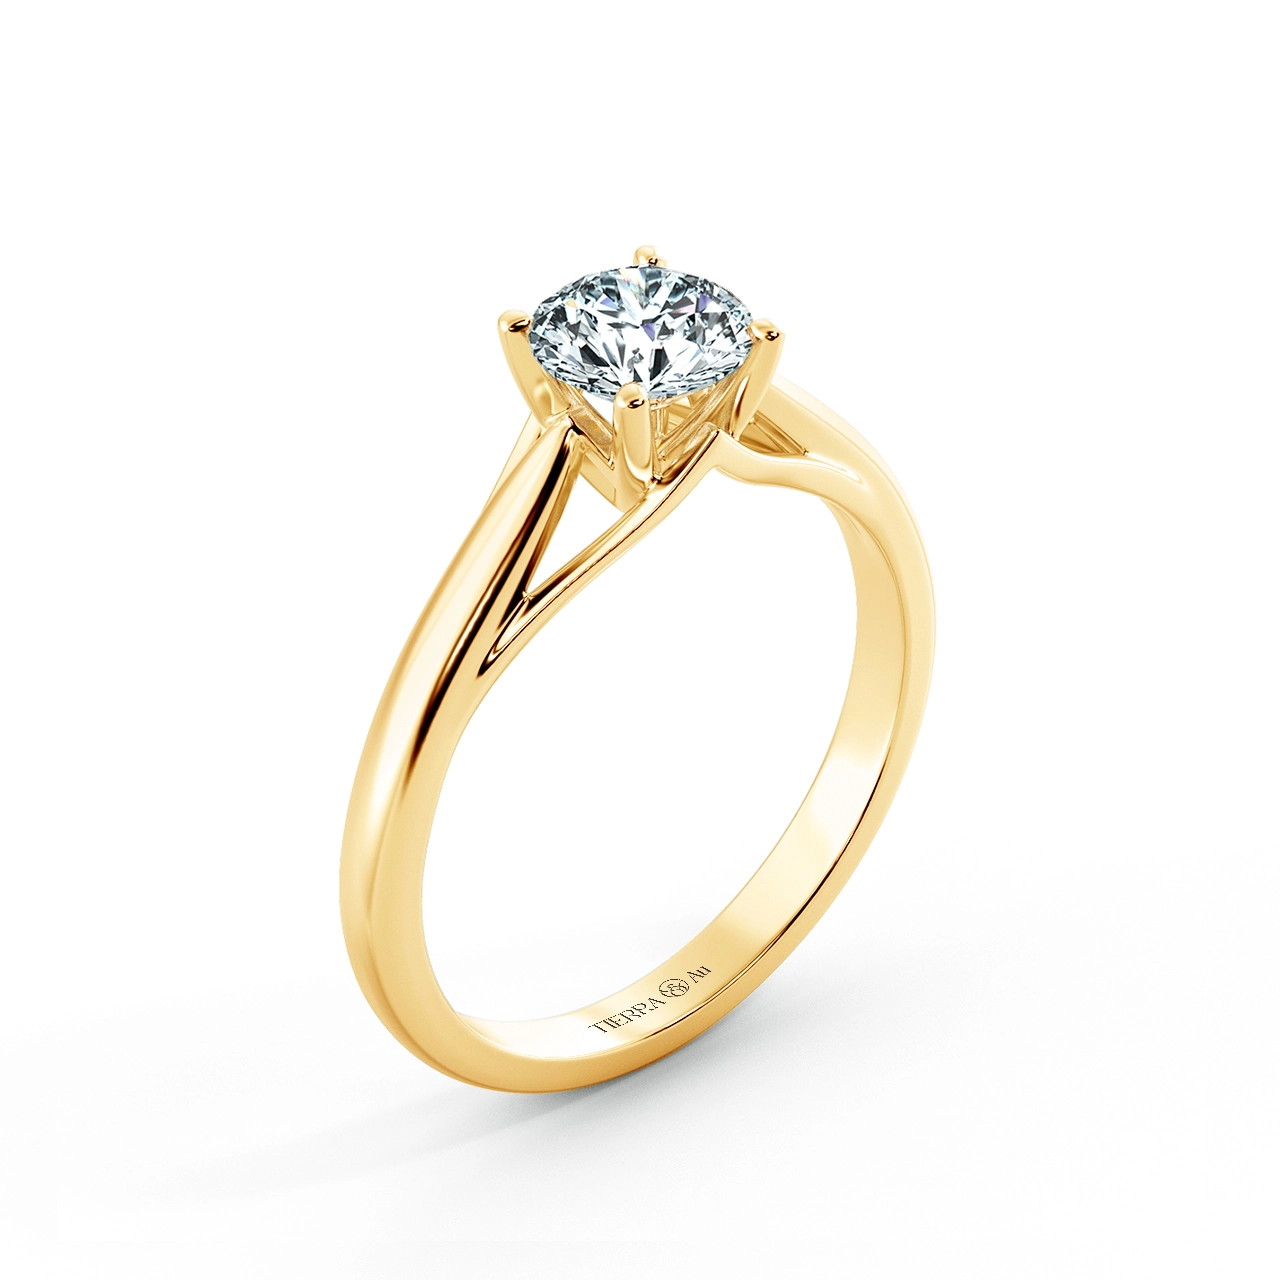 Shiny Trellis Engagement Ring with Four Prong Stylized NCH1405 4